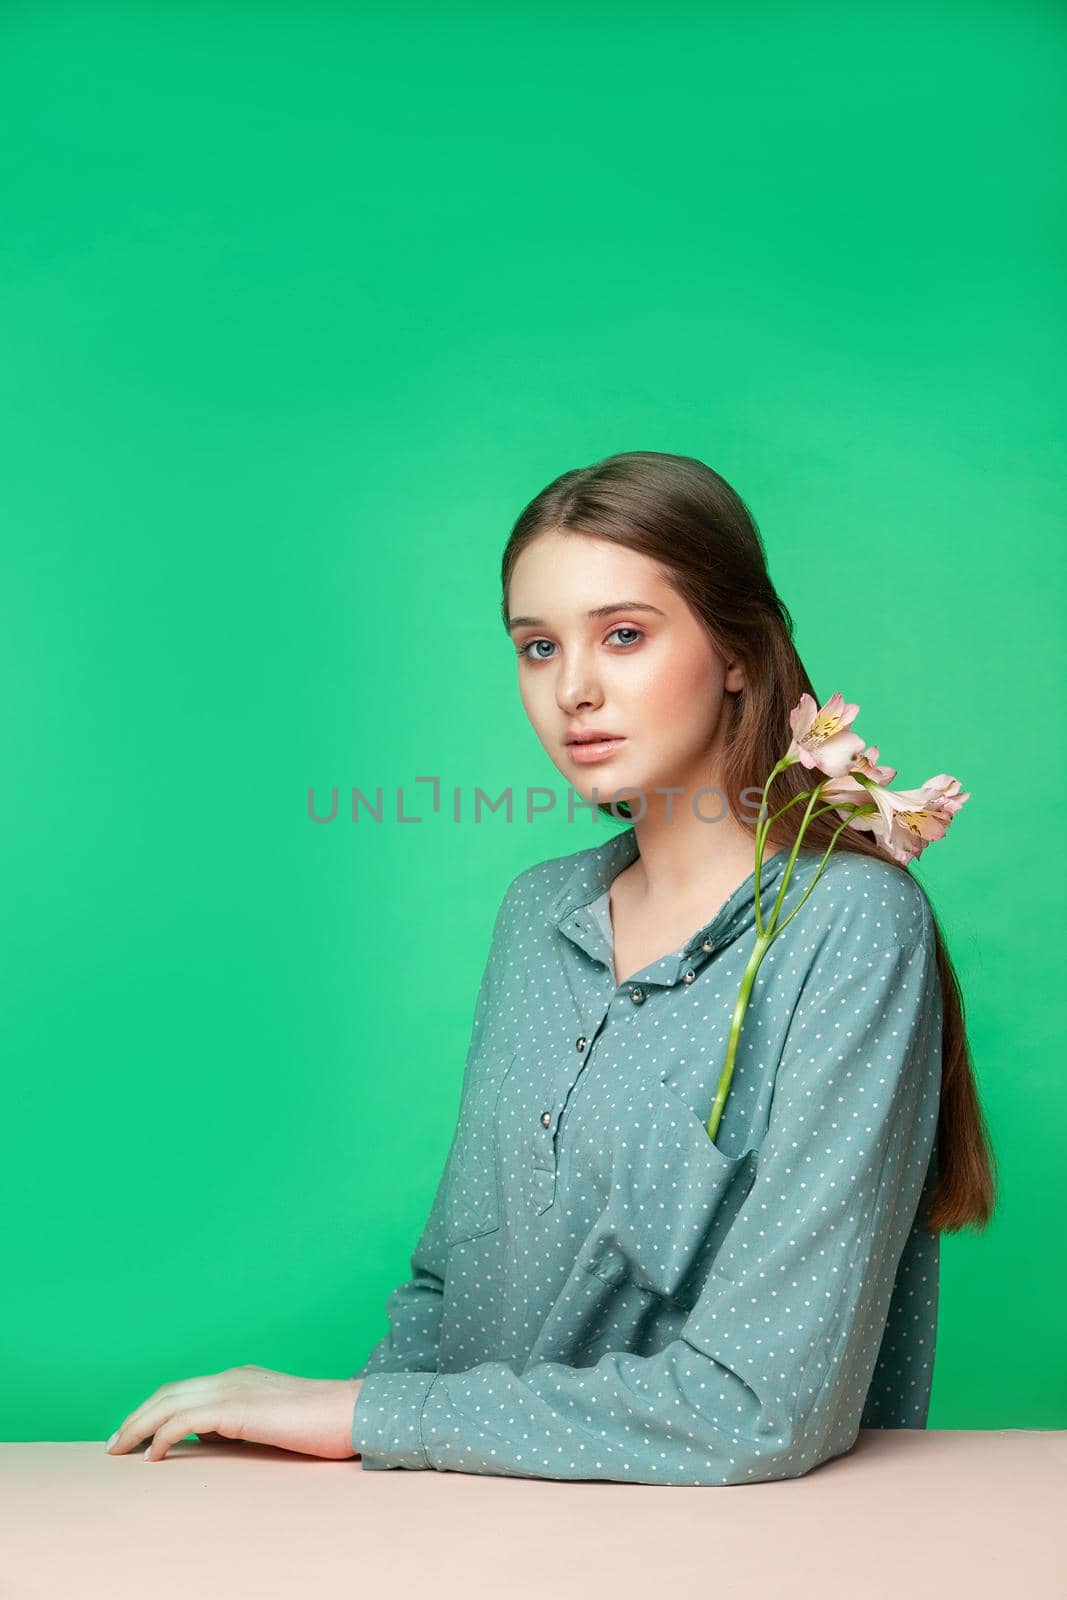 Young woman with fresh flowers in pocket of stylish dotted shirt looking at camera while sitting at table against green background